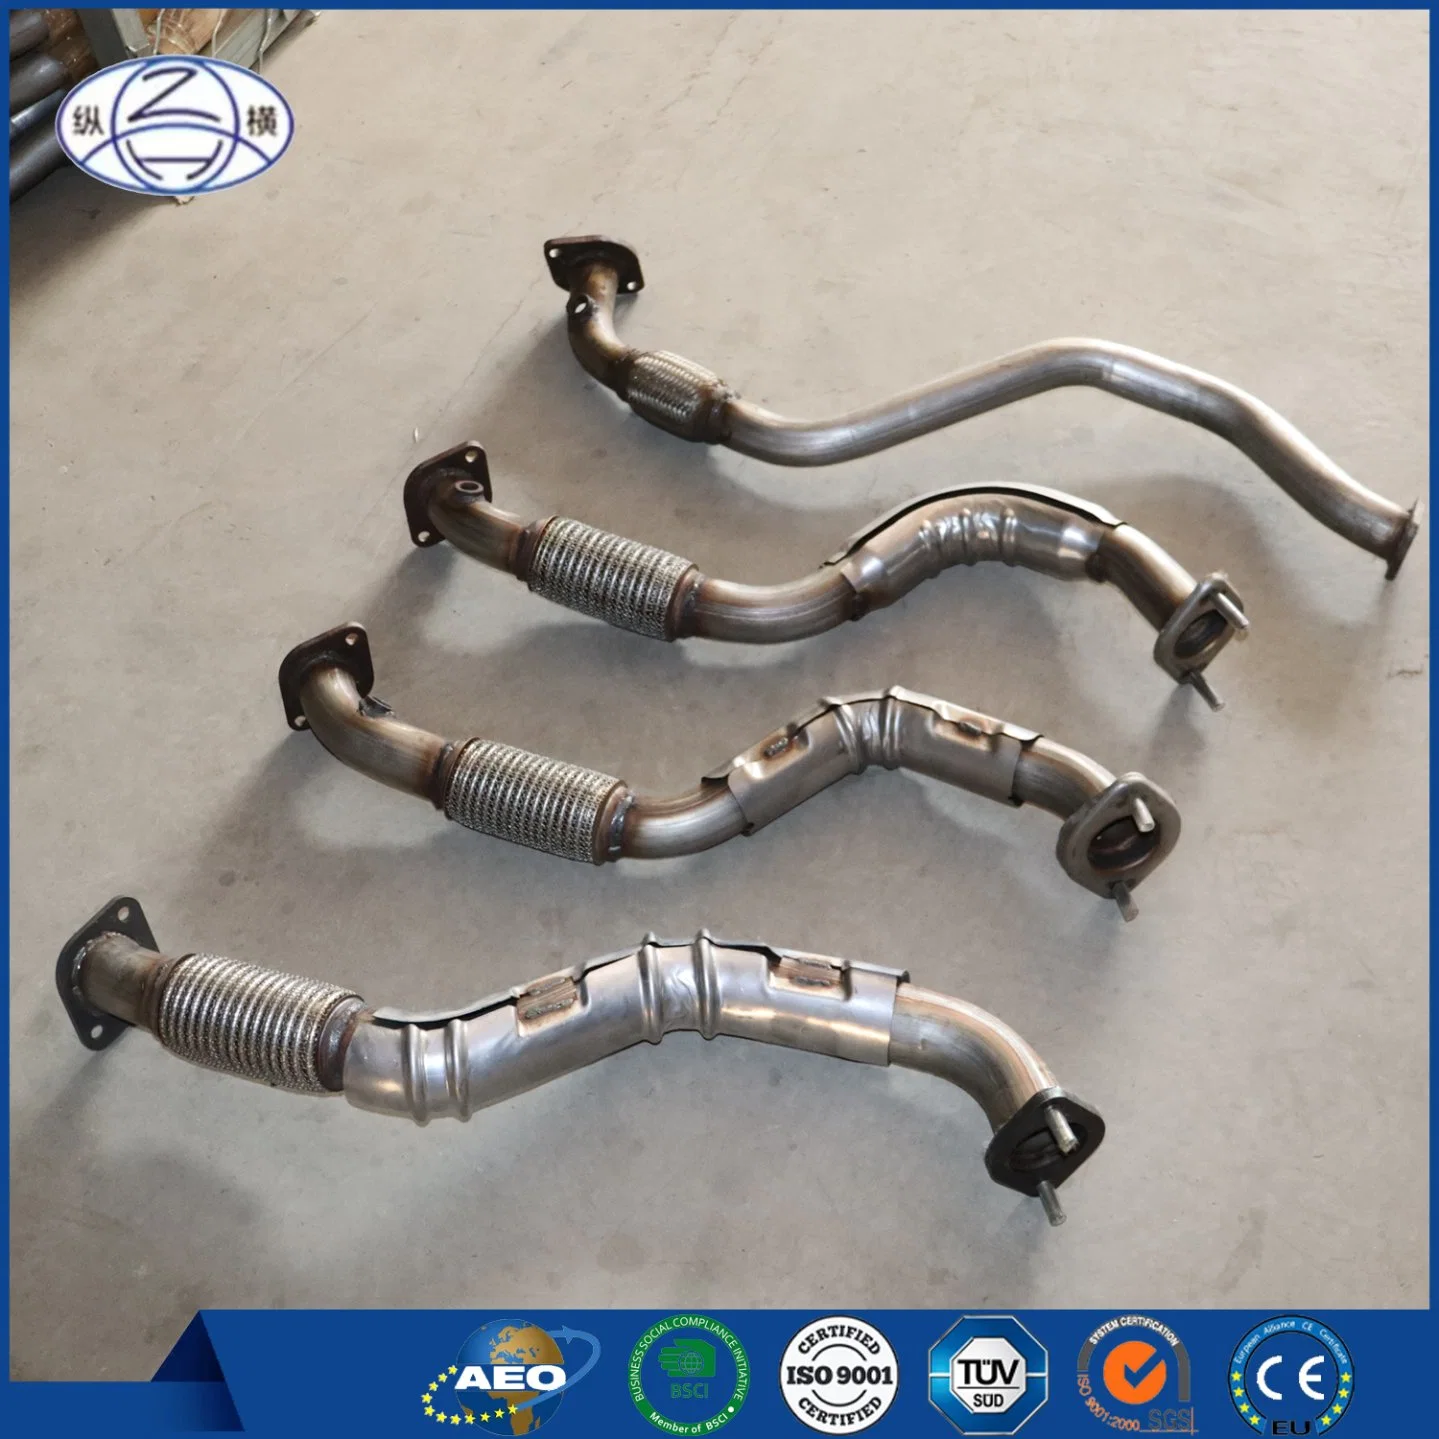 Exhaust Mufflers and Exhaust Systems for Cars, Trucks and Suvs